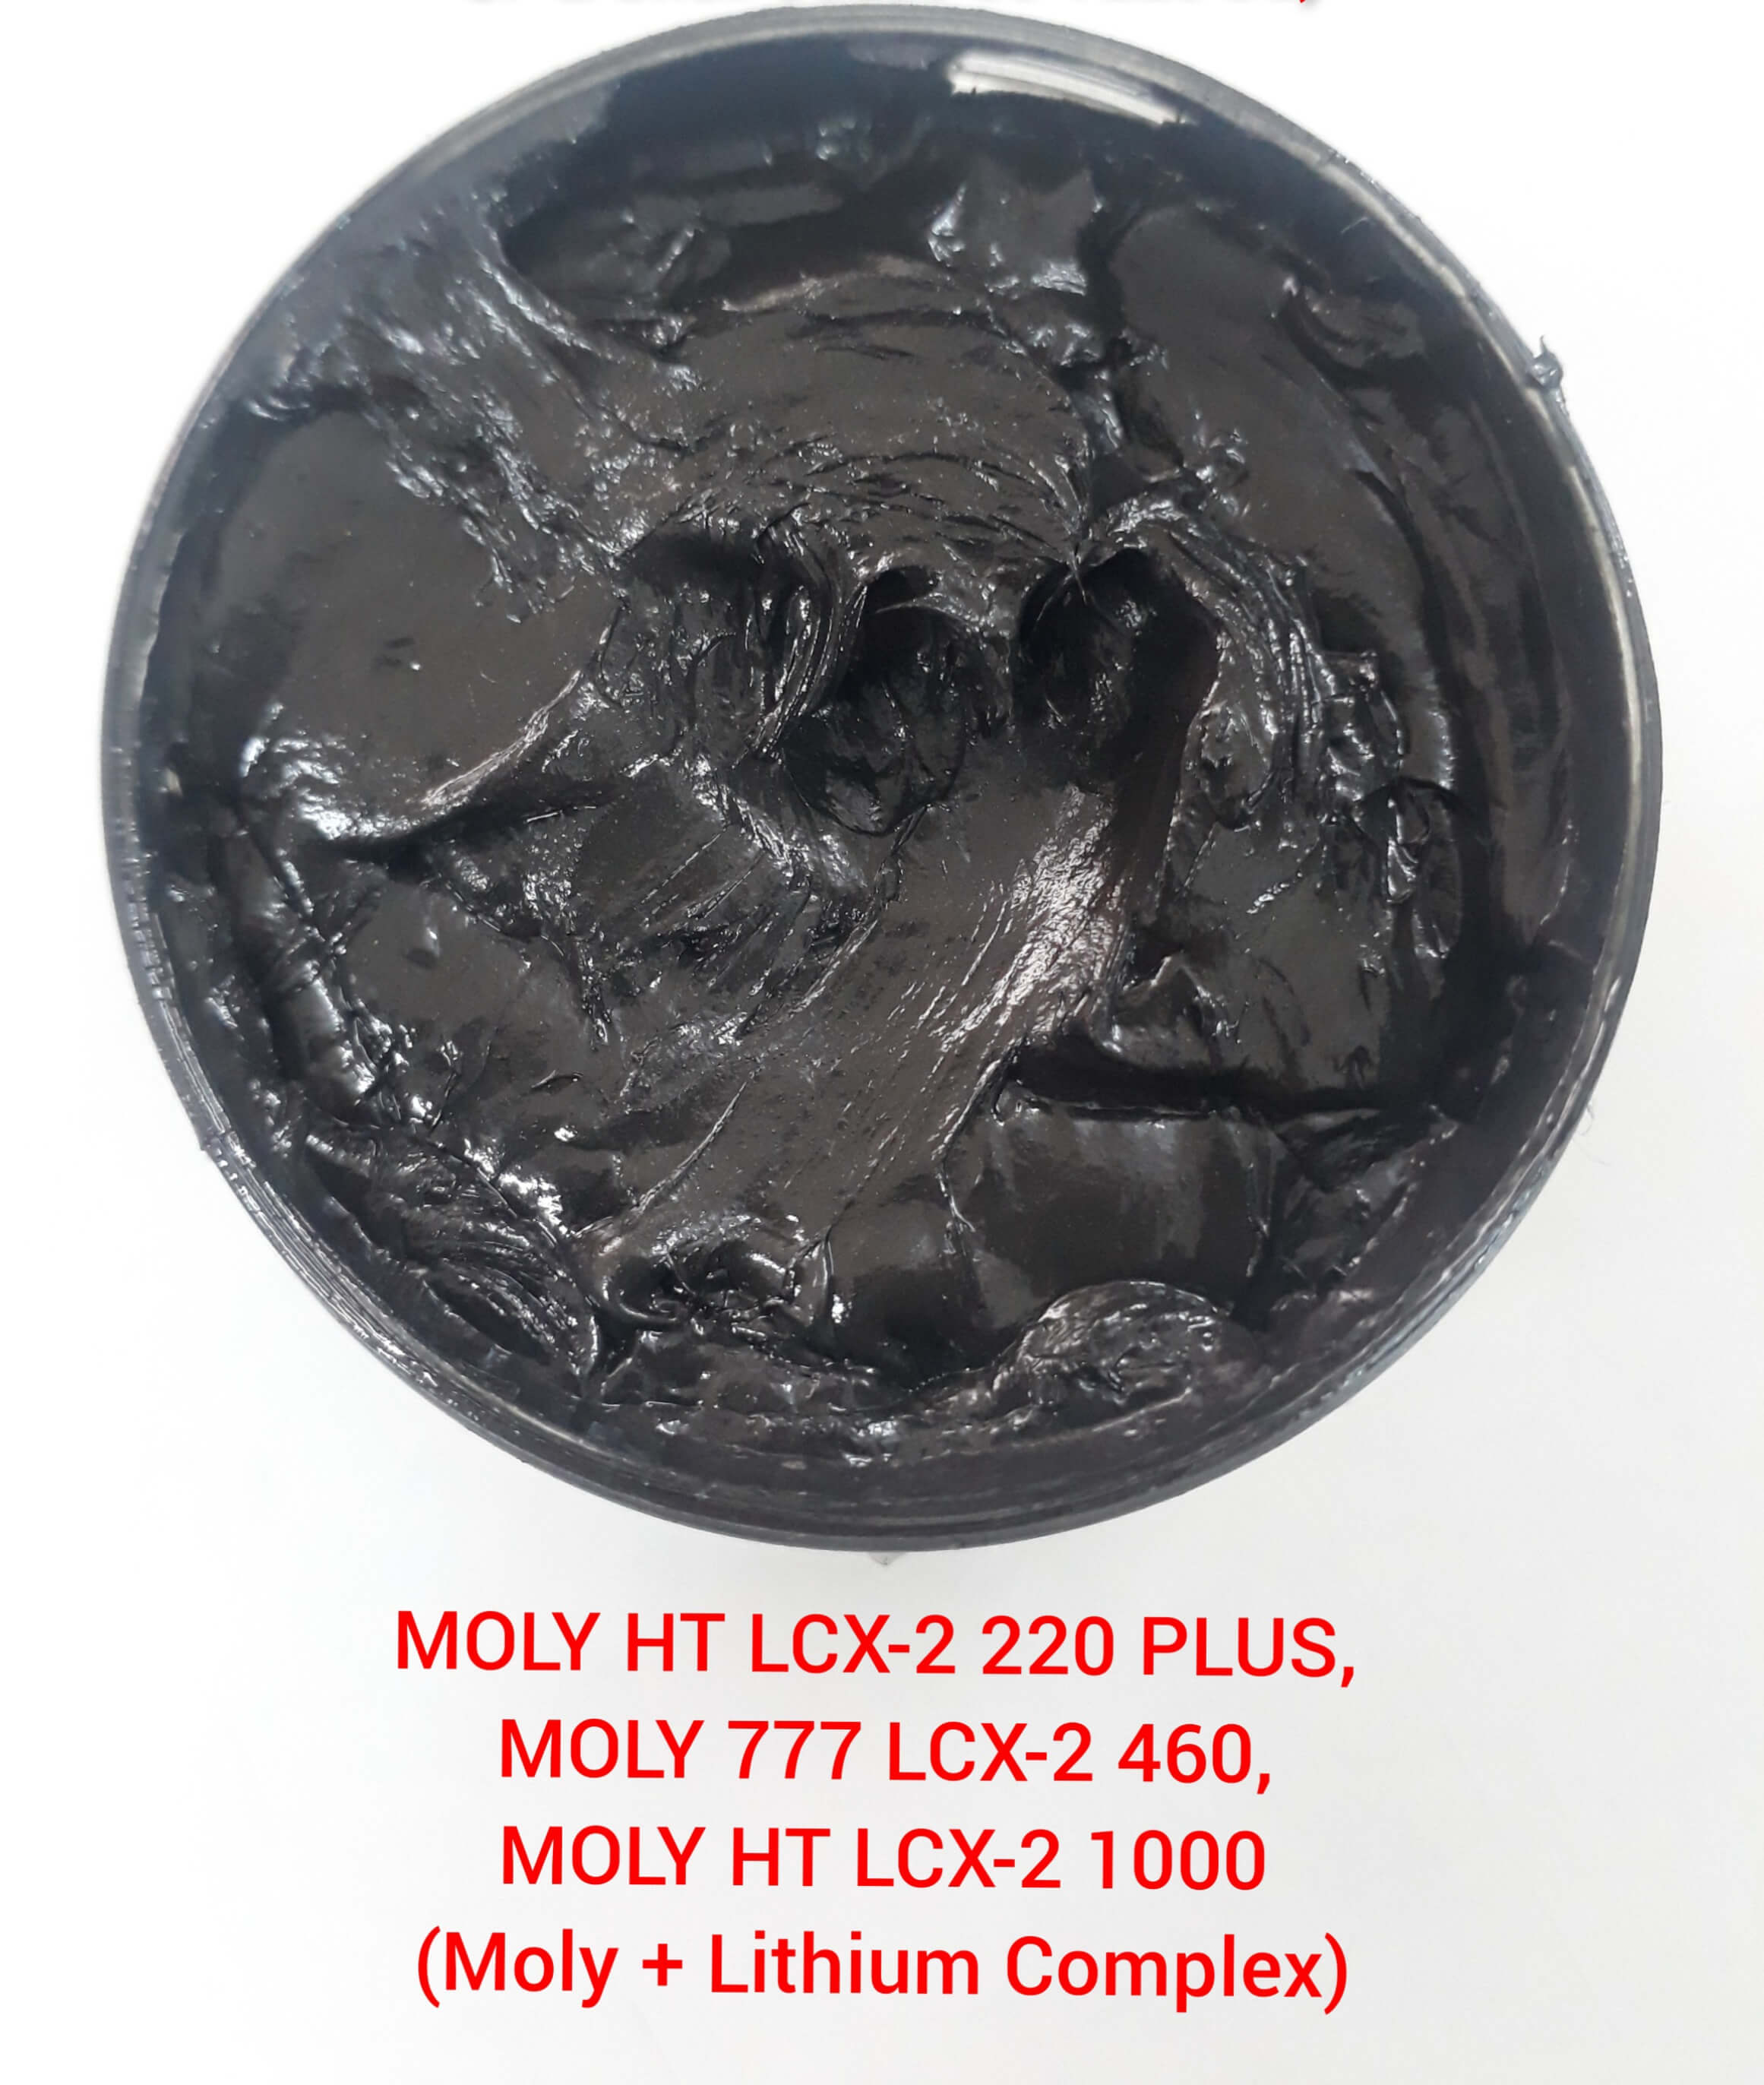 MOLY HT LCX-2 220 plus HD & MOLY 777 LCX-2 460 HD